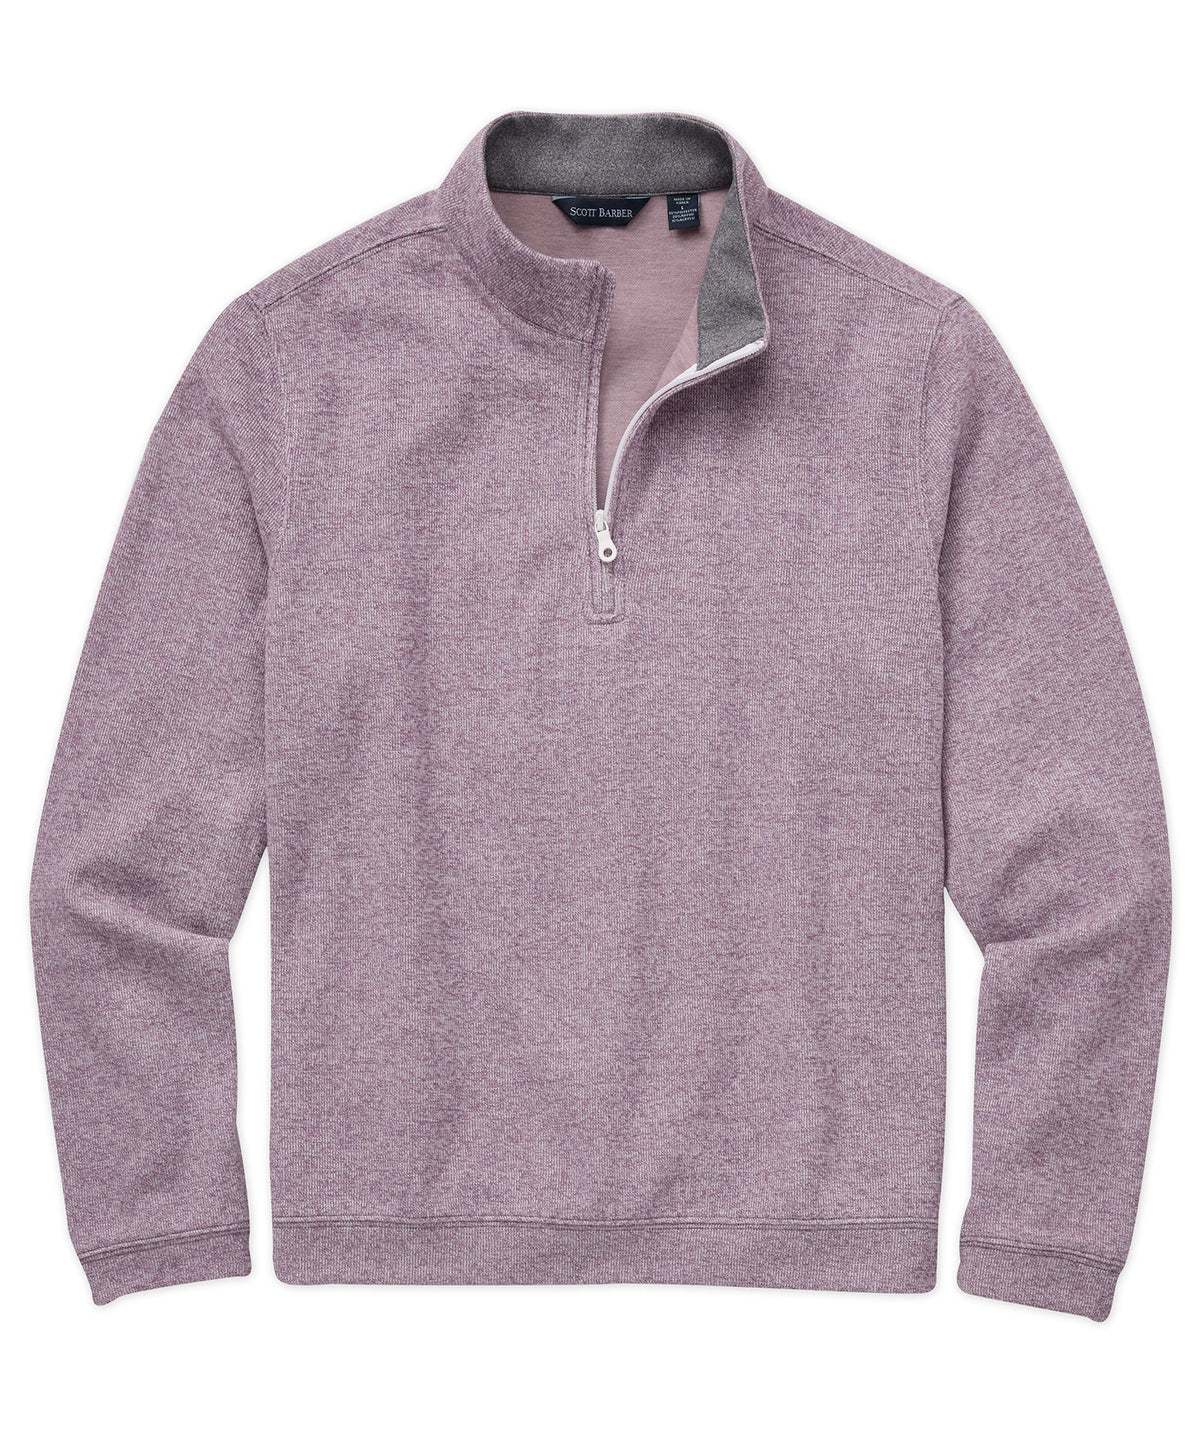 Marled Sweater Knit Quarter-Zip Pullover